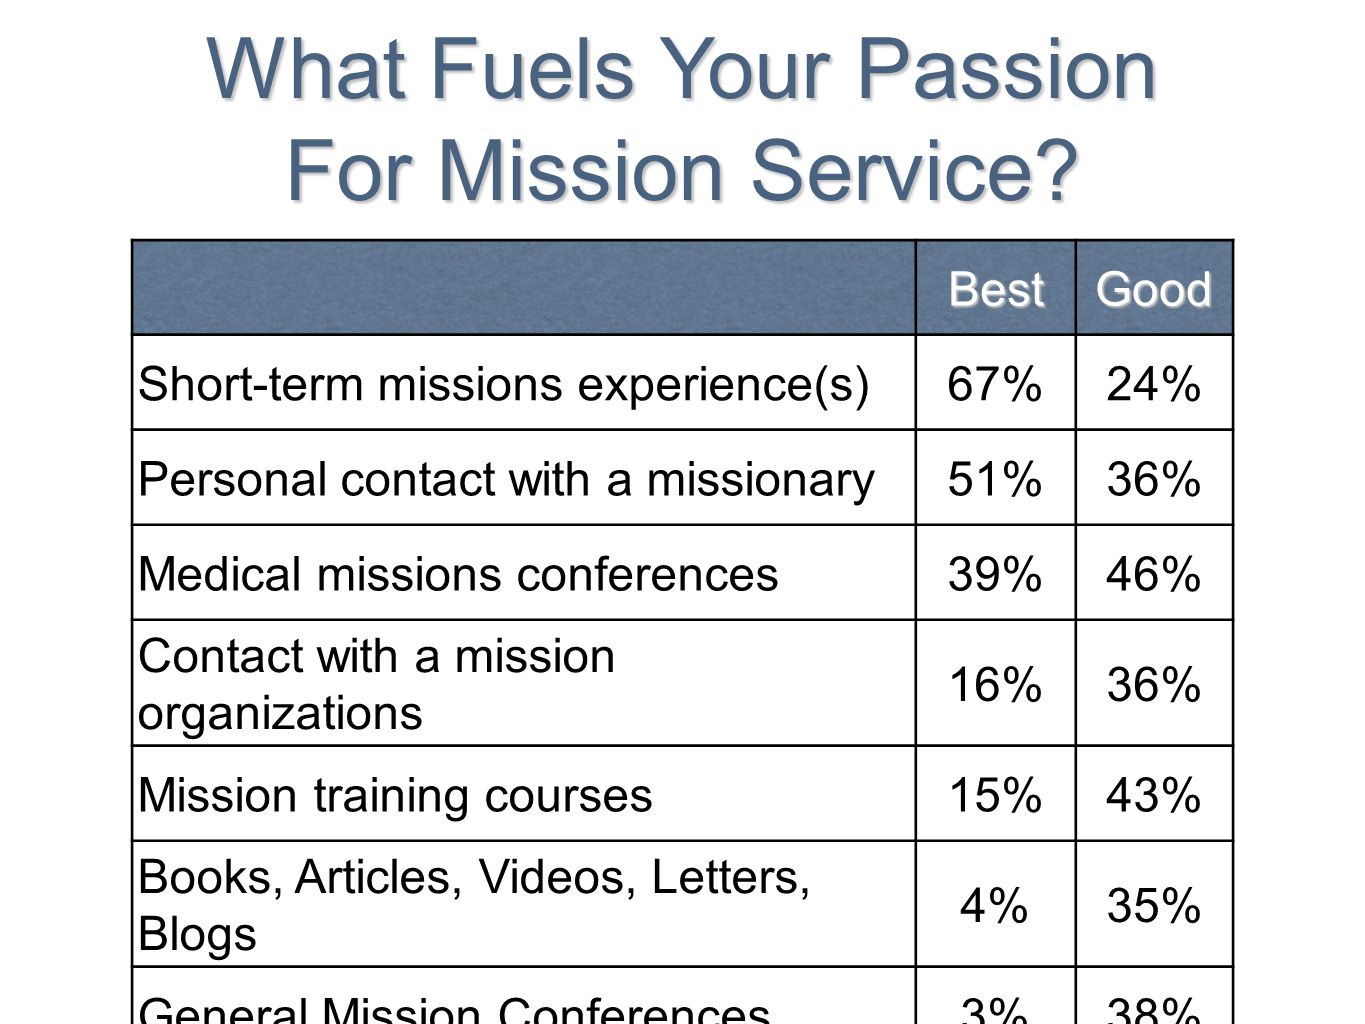 BestGood Short-term missions experience(s)67%24% Personal contact with a missionary51%36% Medical missions conferences39%46% Contact with a mission organizations 16%36% Mission training courses15%43% Books, Articles, Videos, Letters, Blogs 4%35% General Mission Conferences3%38% What Fuels Your Passion For Mission Service